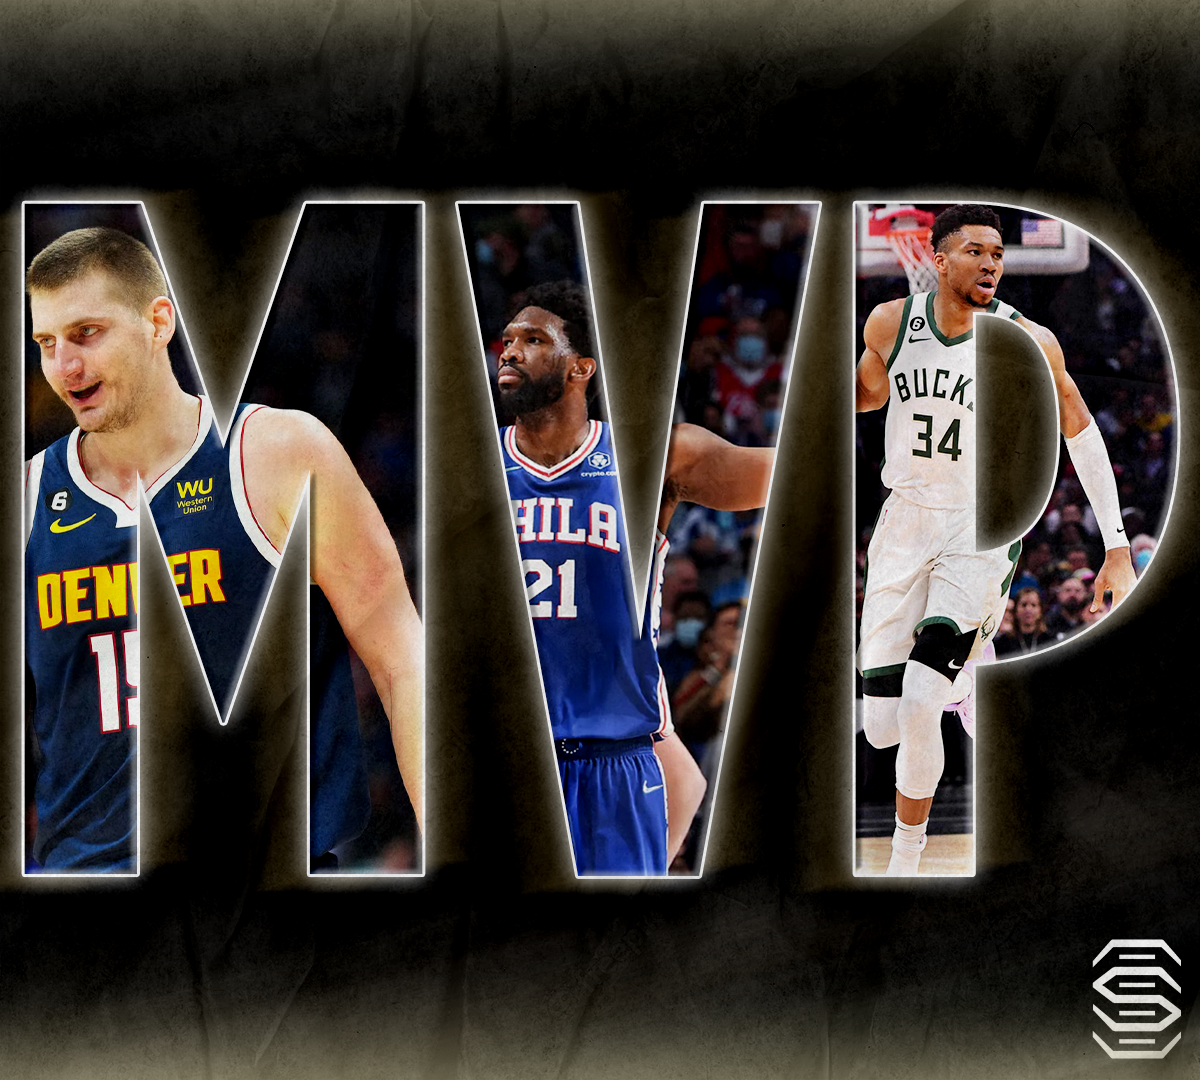 All-NBA awards tracker: Rookie, Defensive and All-NBA teams